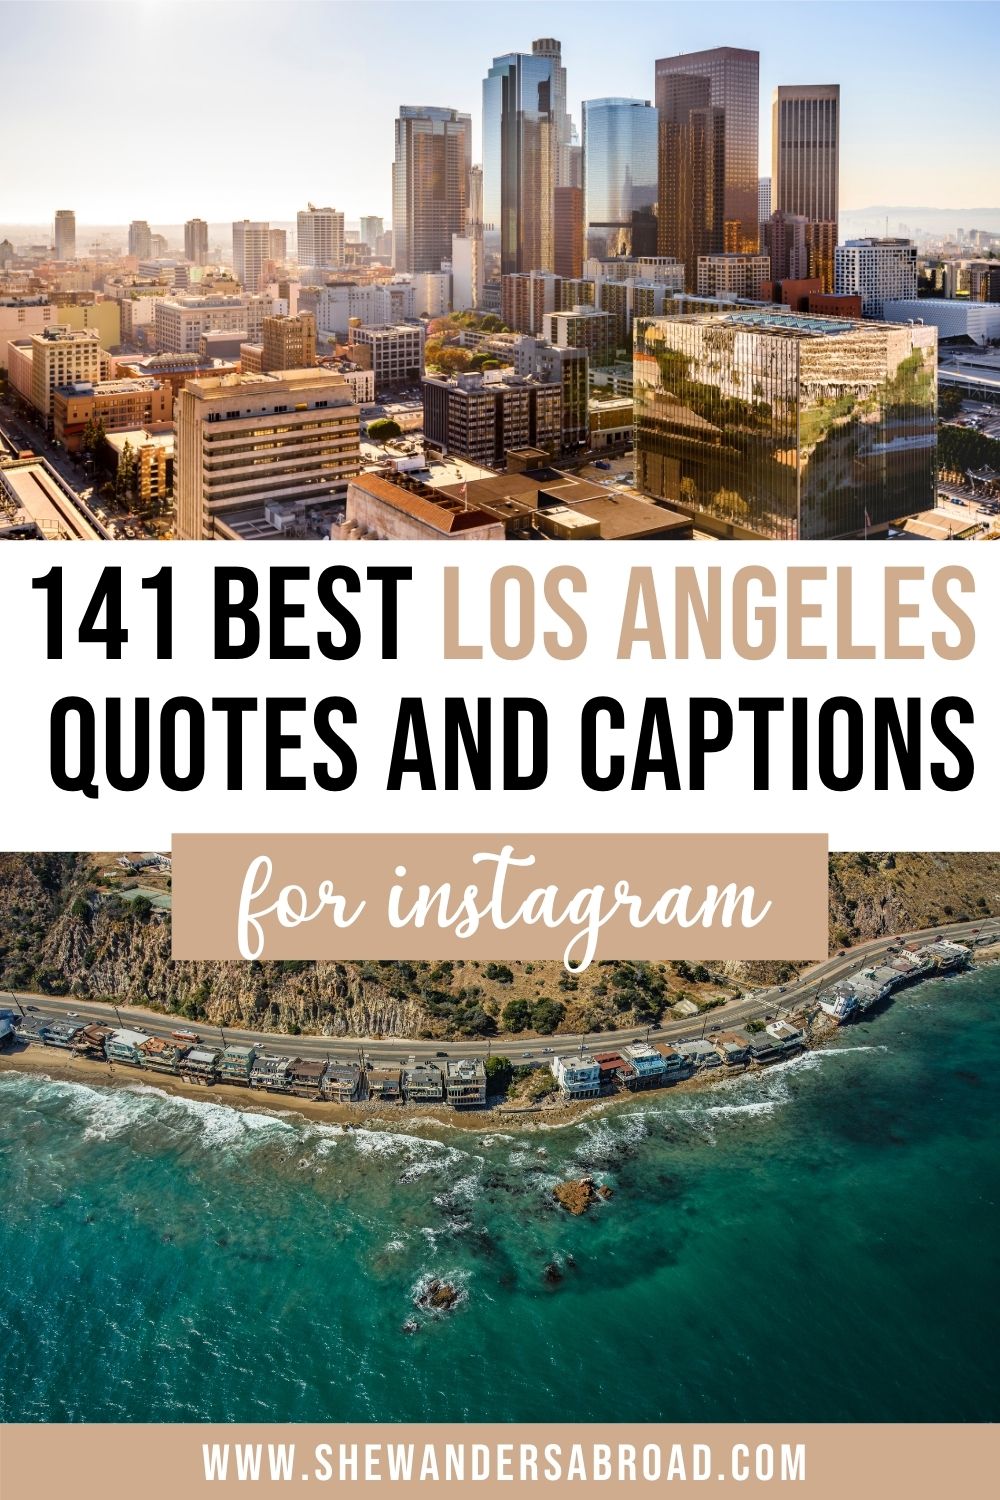 141 Los Angeles Captions for Instagram